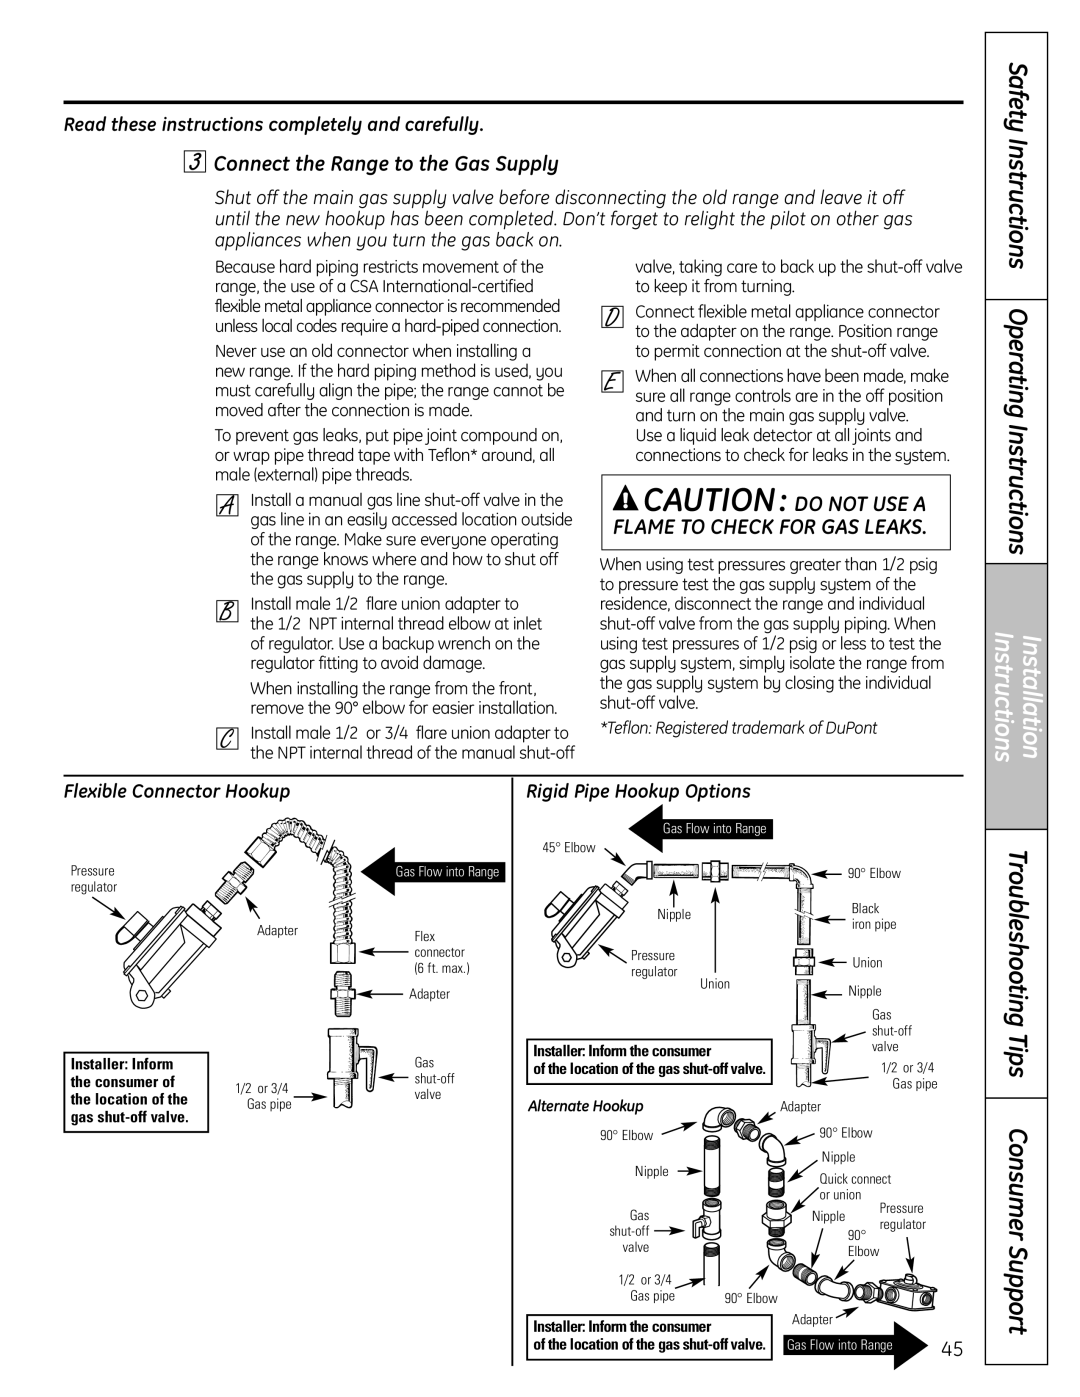 GE 04-09 JR, C2S980 manual Connect the Range to the Gas Supply, Operating Instructions, Installation, Safety Instructions 